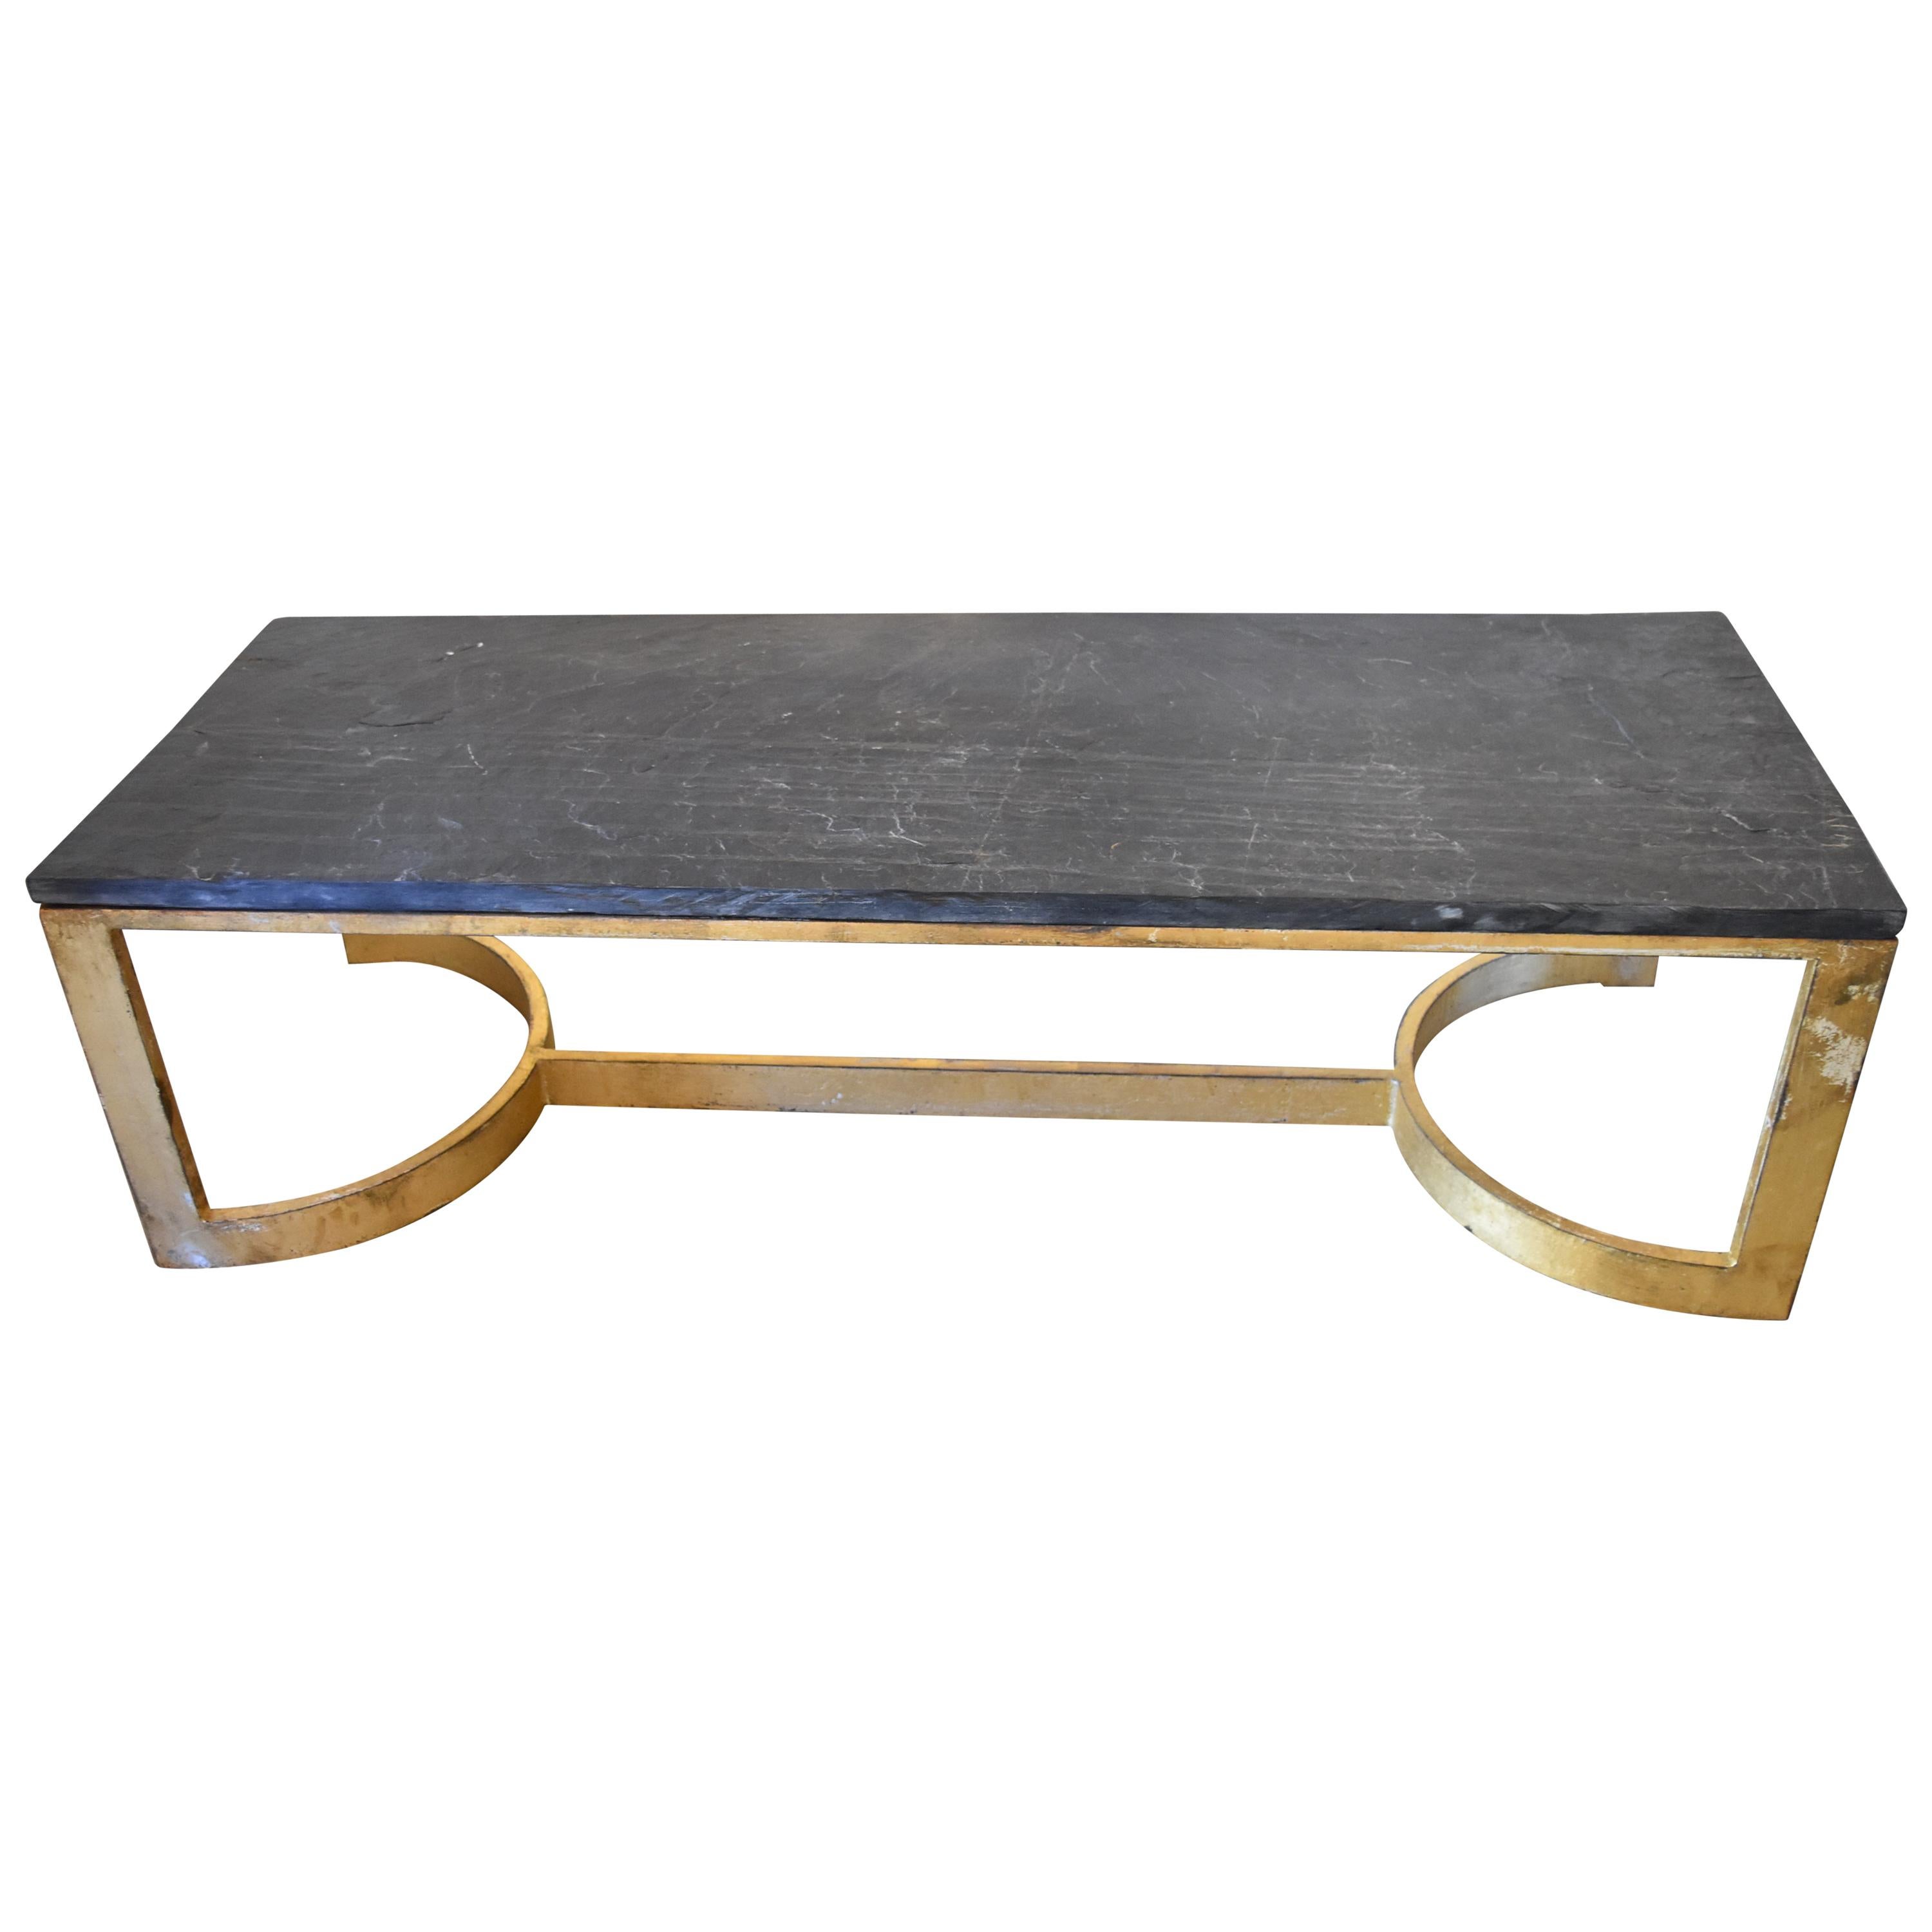 Black and Gold Antica Collection Fabricated Steel Table with Thick Slate Top